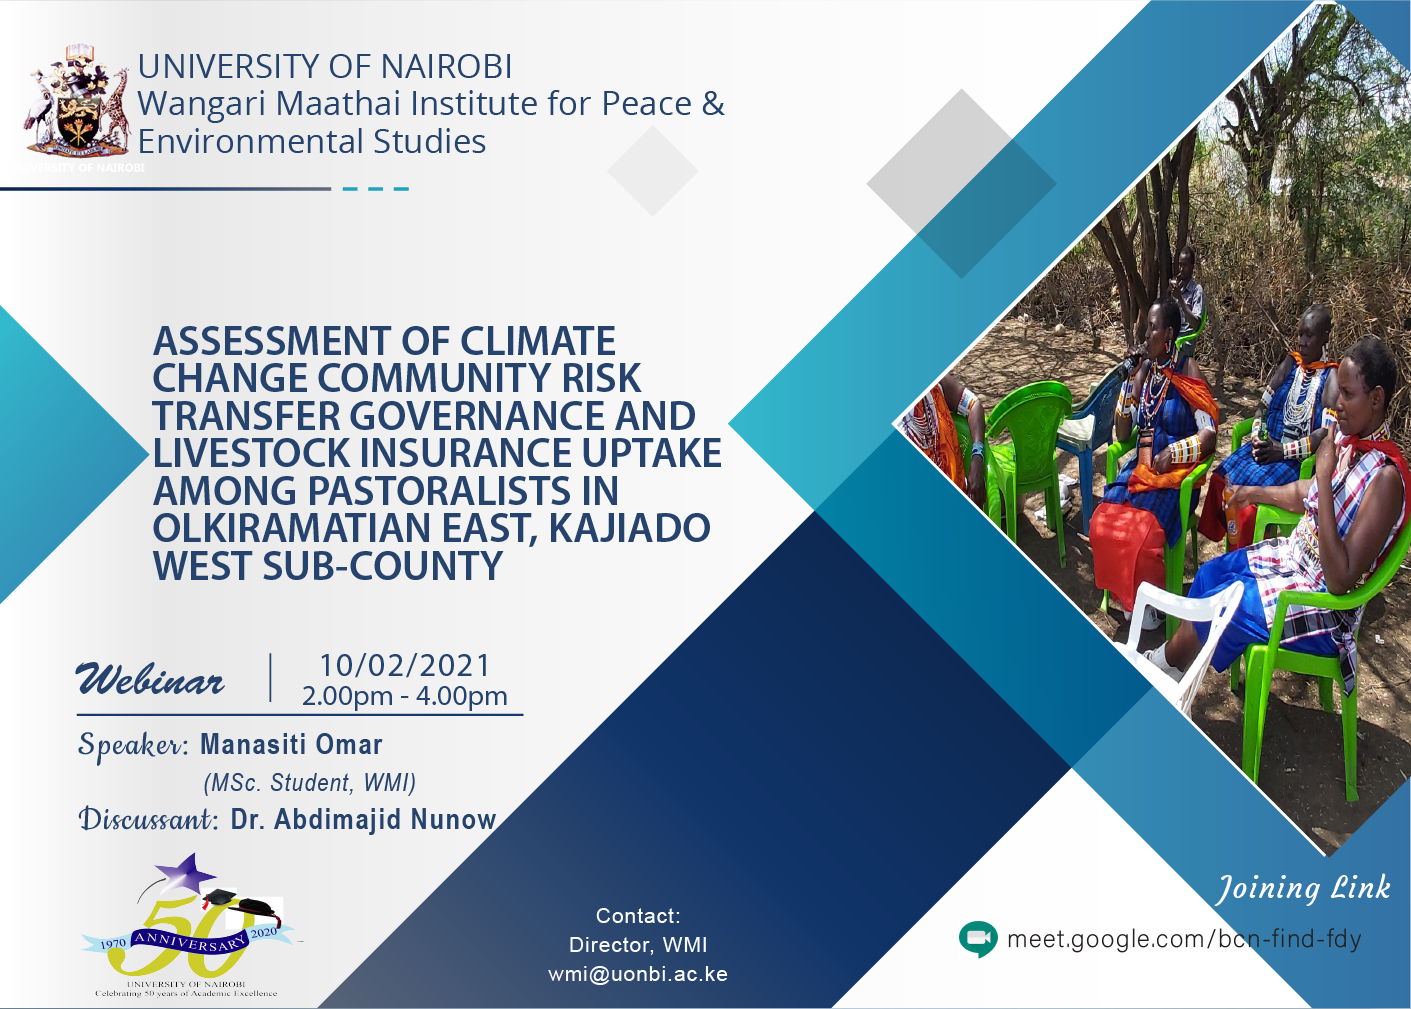 INVITATION TO A WEBINAR: ASSESSMENT OF CLIMATE CHANGE COMMUNITY RISK TRANSFER GOVERNANCE AND LIVESTOCK INSURANCE UPTAKE AMONG PASTORALISTS IN OLKIRAMATIAN EAST, KAJIADO WEST SUB-COUNTY